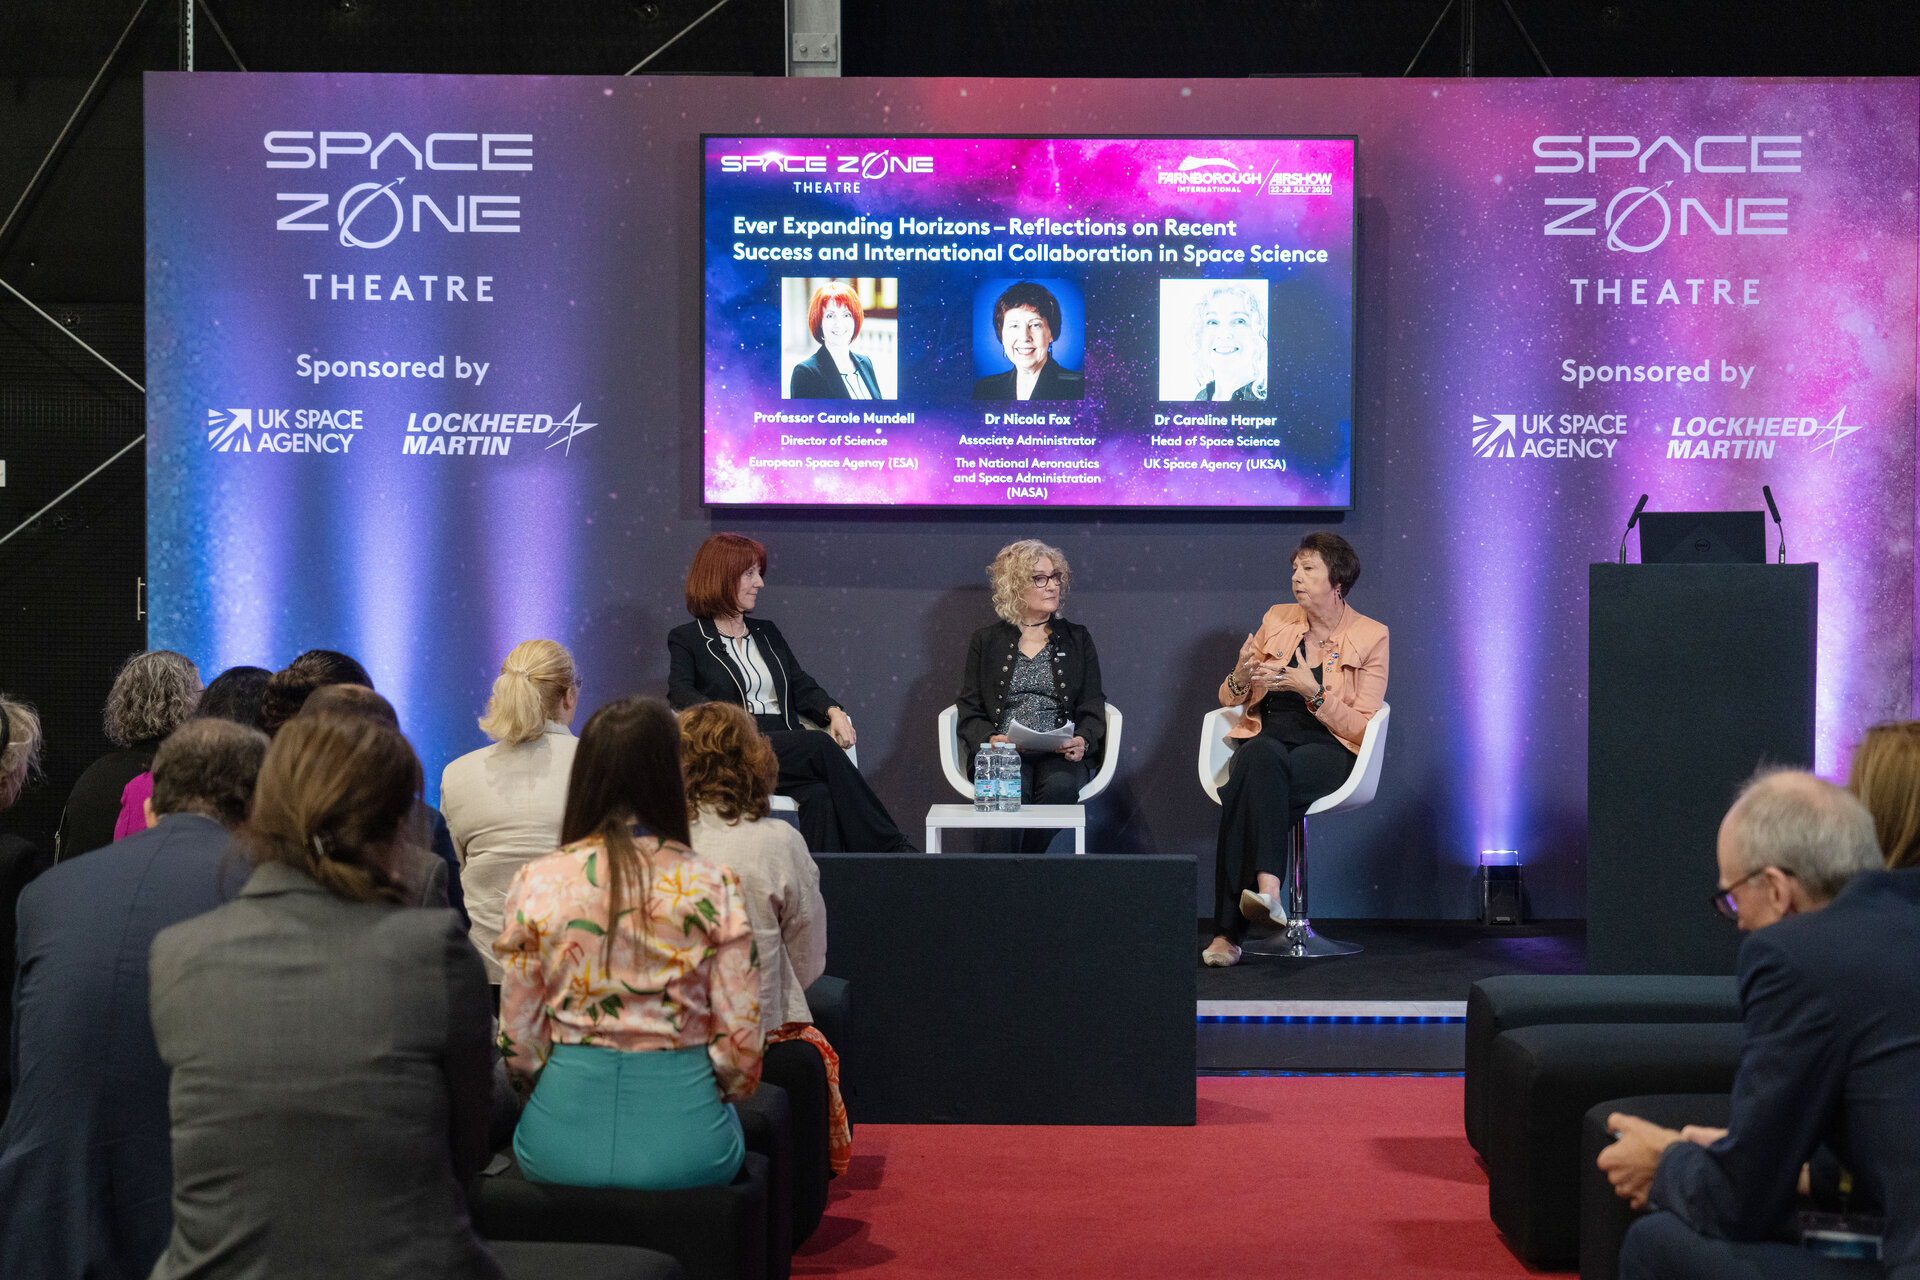 Panel discussion 'Ever-expanding horizons - reflections on recent success and international collaboration in space'.